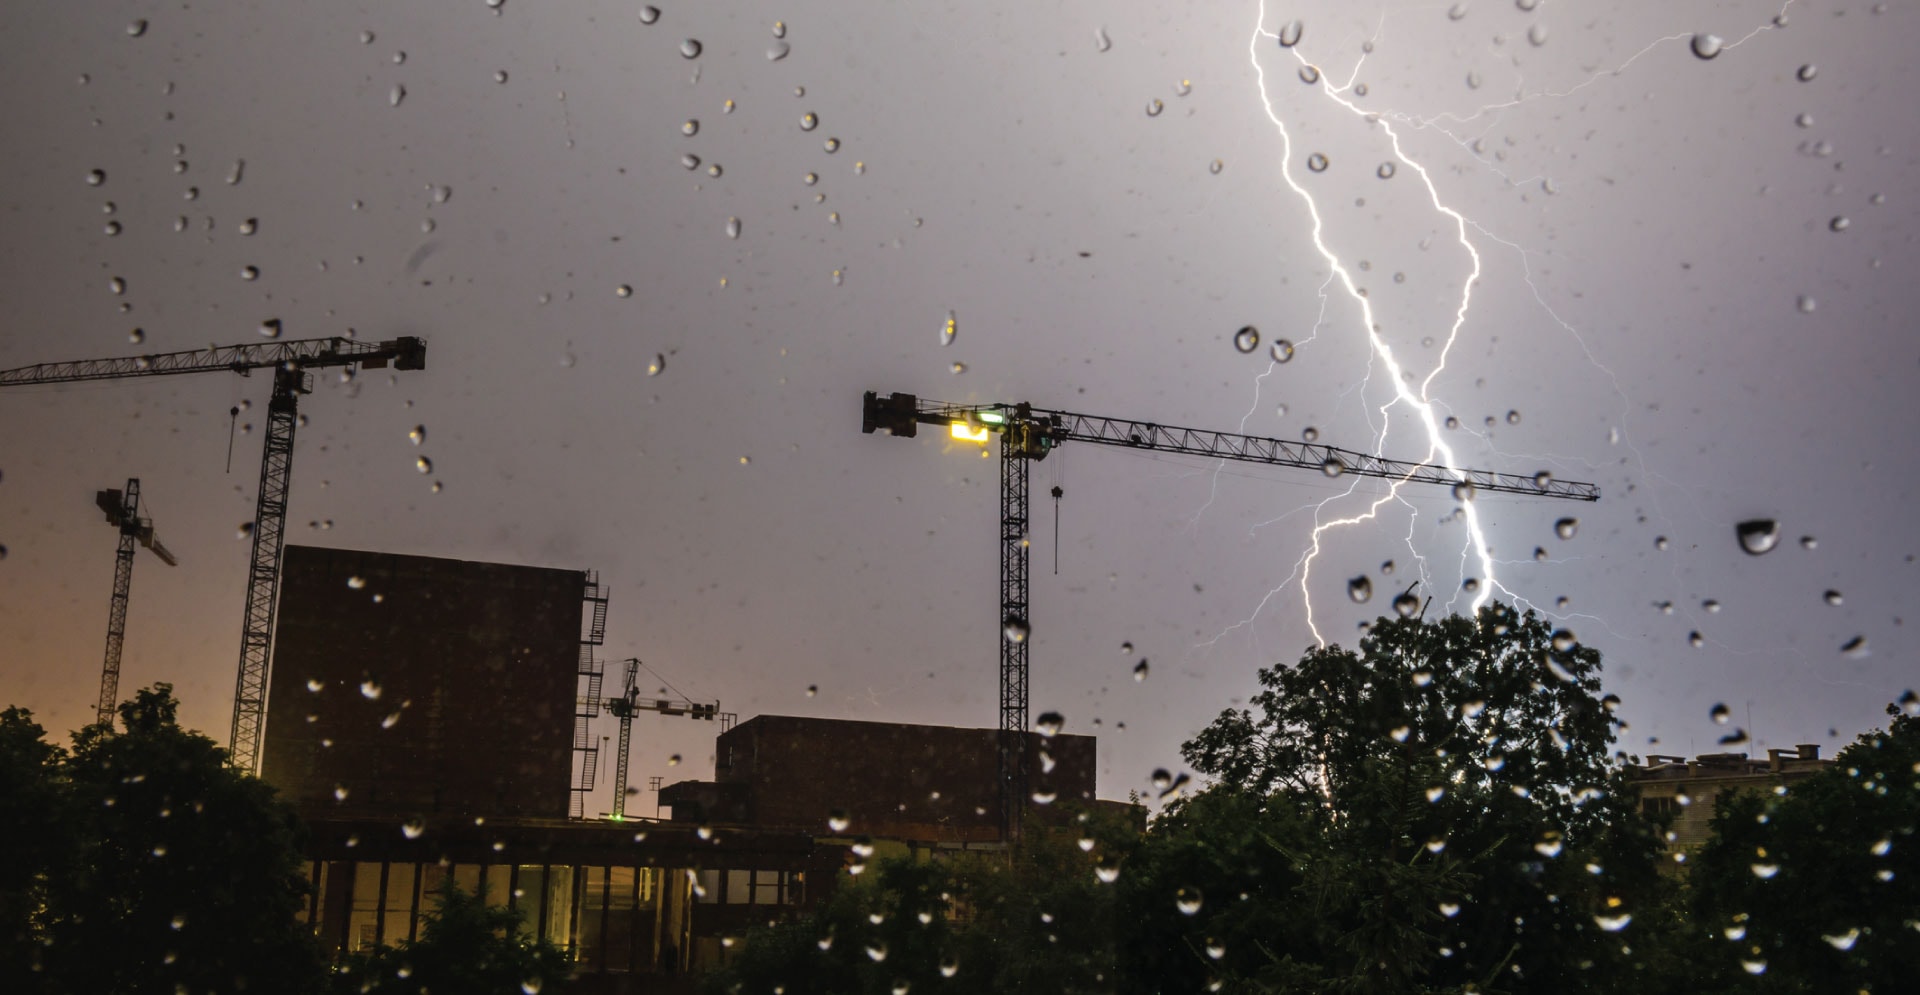 Construction site on a stormy night with lightning